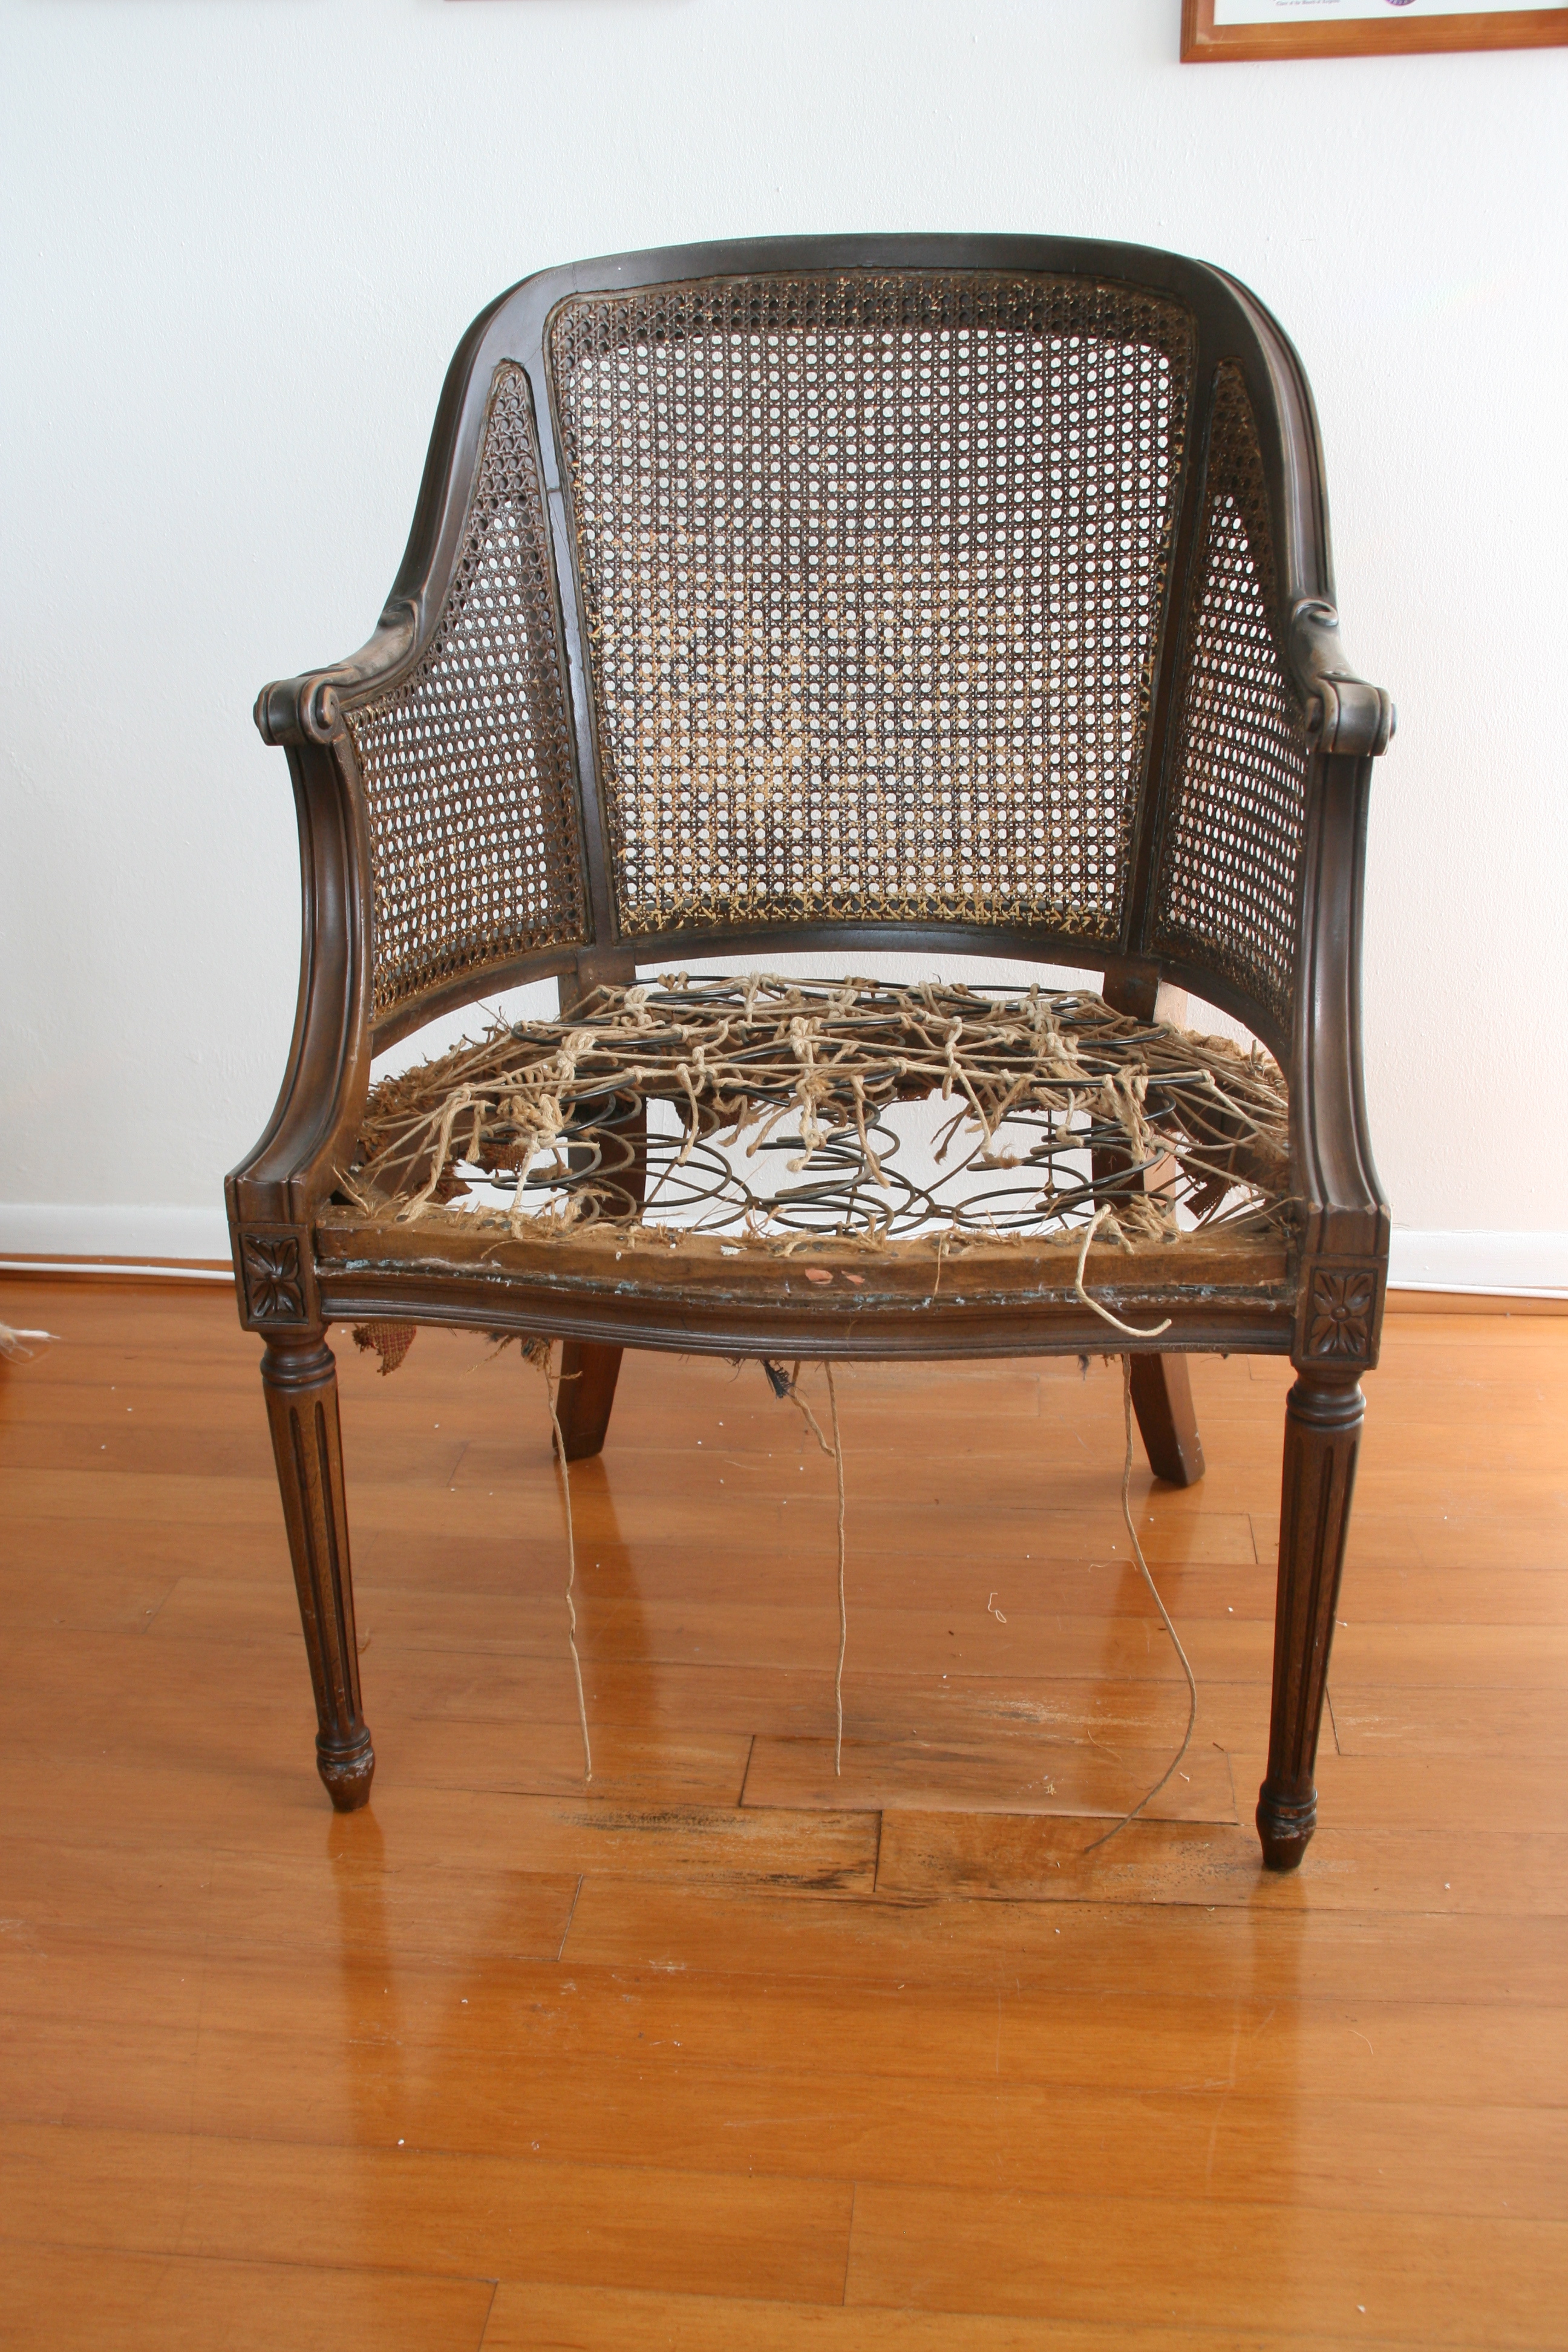 old chair stripped